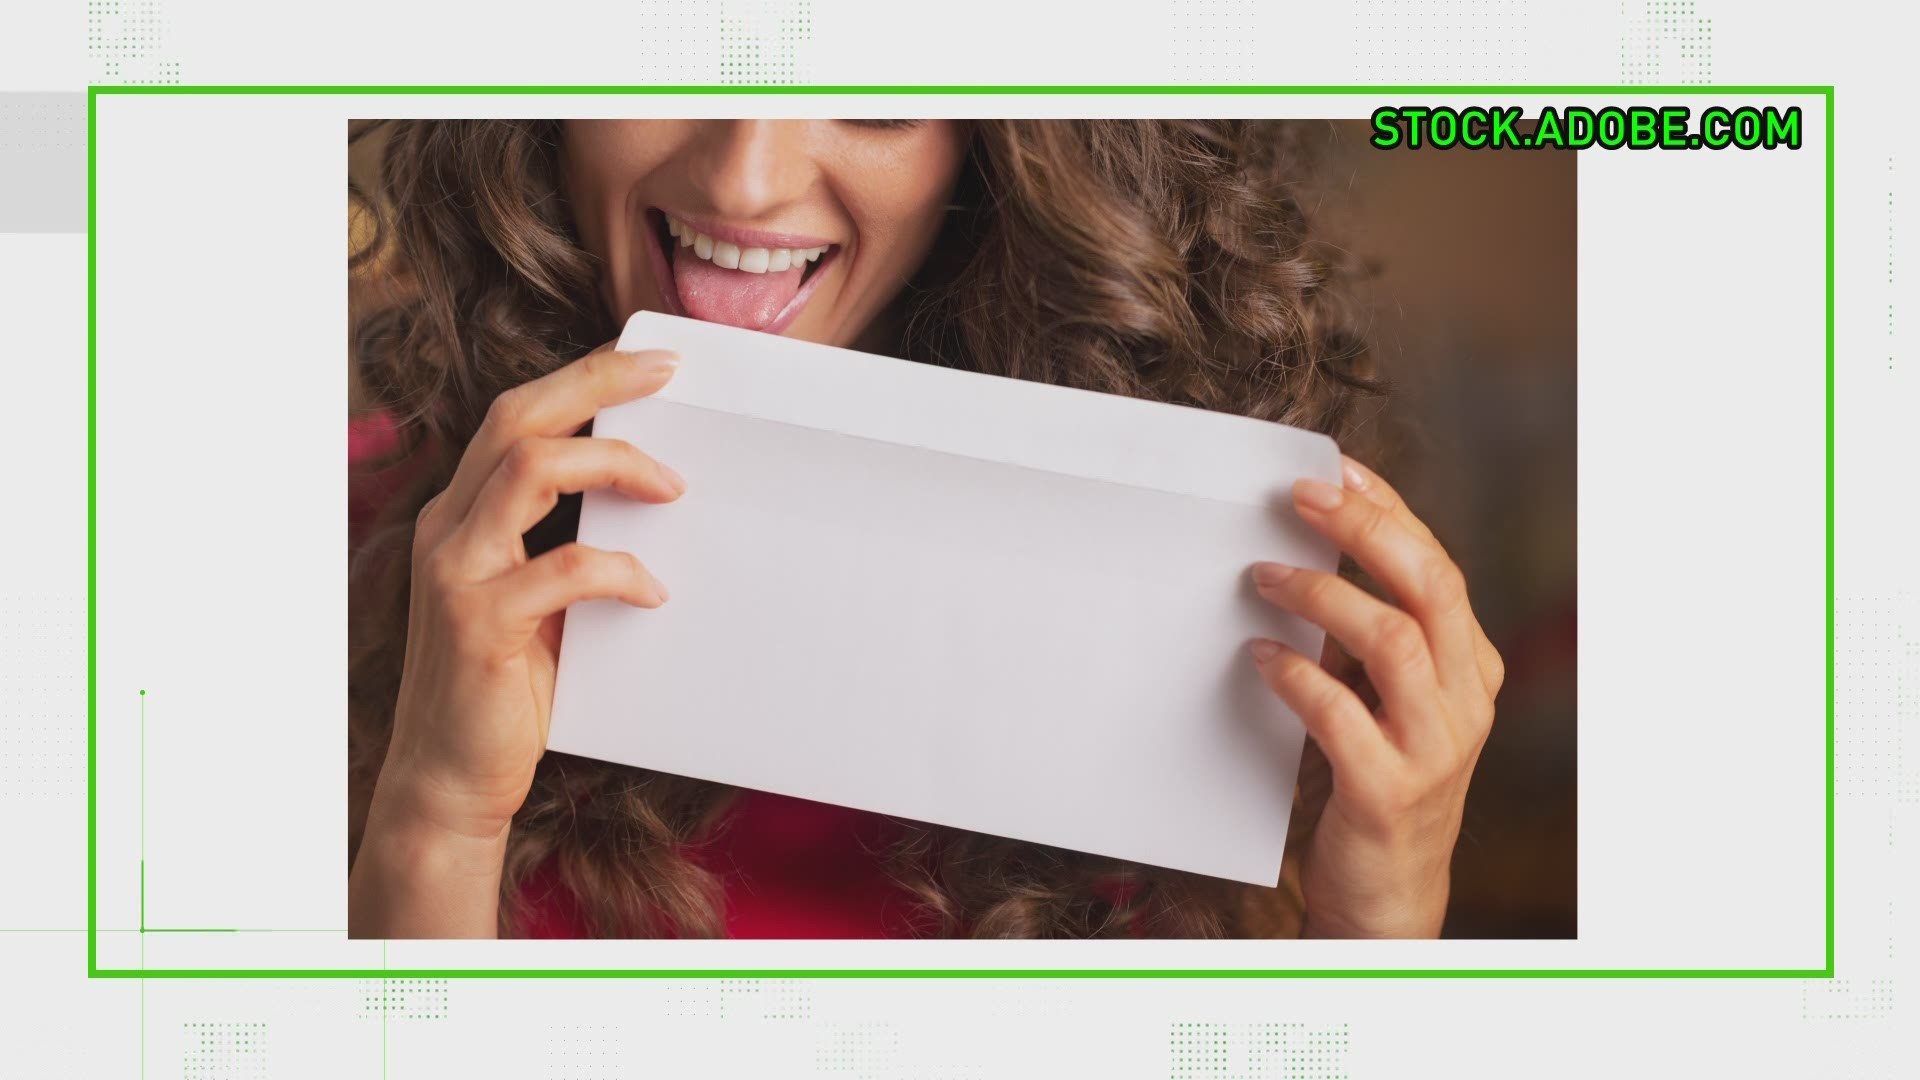 "Isn't this unsanitary?" A local postal worker expressed concern when customers take off their masks to lick their envelopes and then hand them to her to mail.